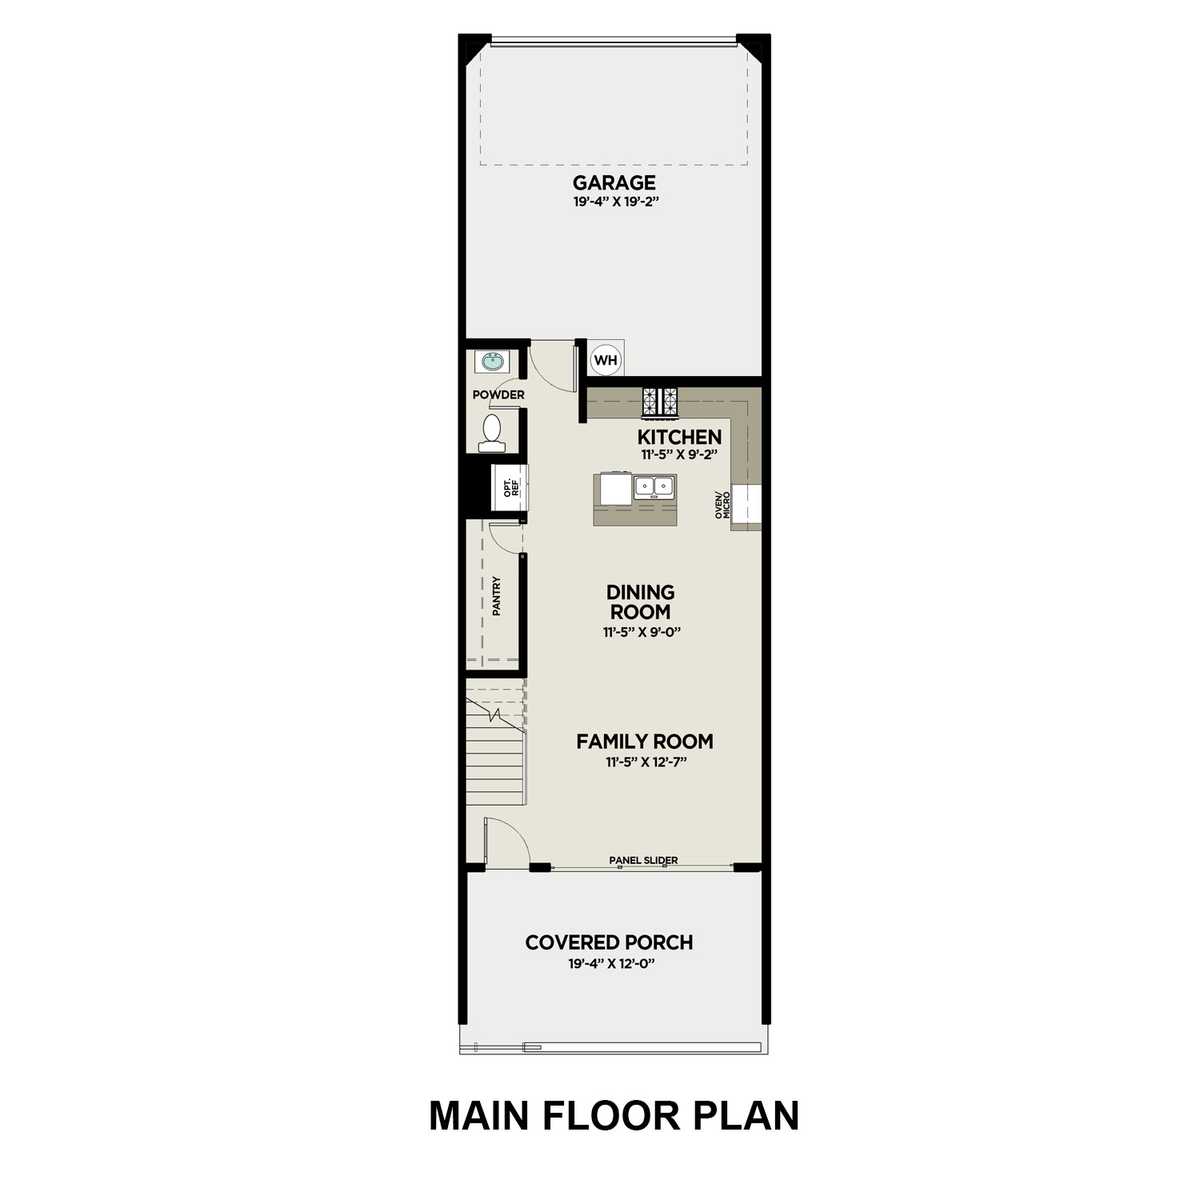 1 - The Seacrest A floor plan layout for 704 Stickley Oak Way in Davidson Homes' The Village at Towne Lake community.